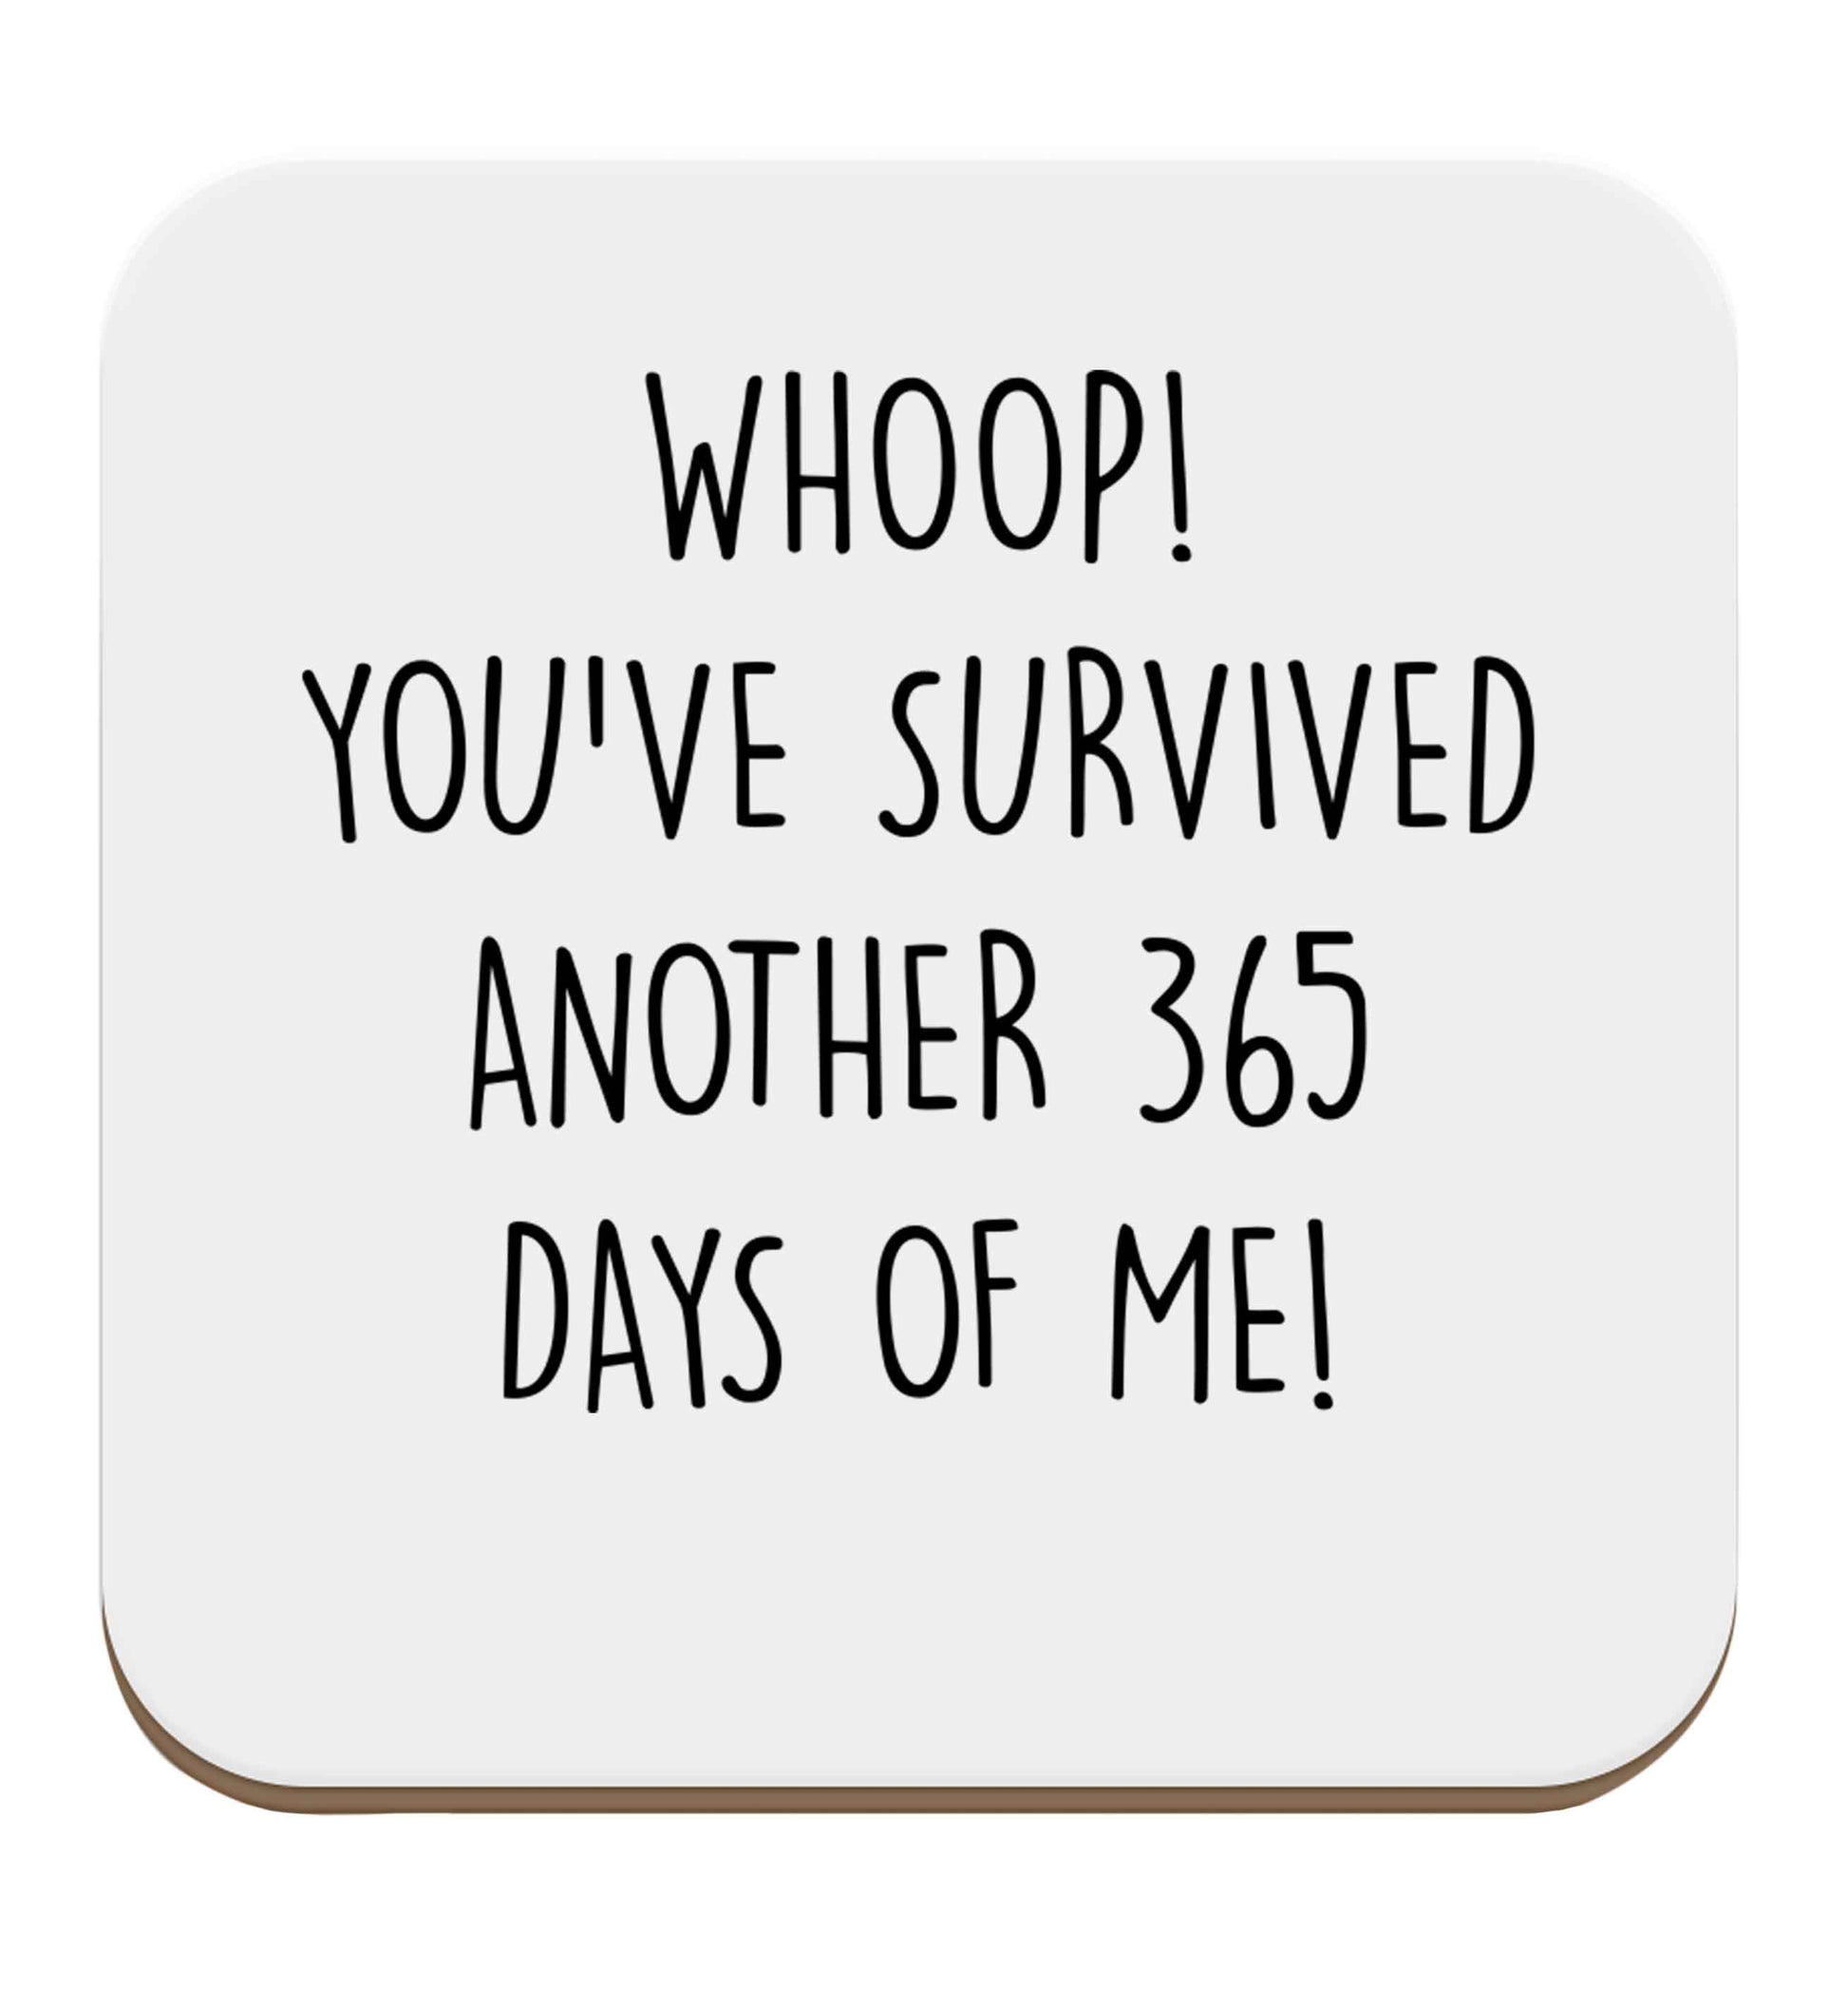 Whoop! You've survived another 365 days with me! set of four coasters